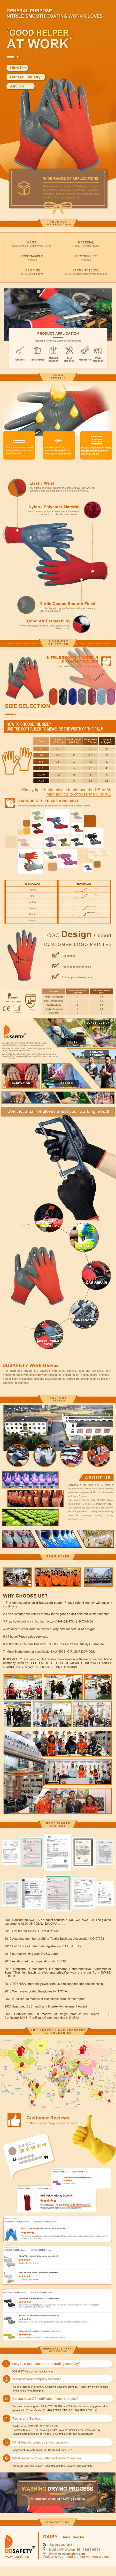 Nylon Seamless Knit Glove with Nitrile Palm Coated Smooth Grip Safety Work Gloves Knit Wrist Cuff- DNN342 Nylon Seamless Knit Glove with Nitrile Palm Coated Smooth Grip Safety Work Gloves Knit Wrist Cuff - DNN342 gloves,work gloves,Nylon Seamless Knit Glove,Knit Glove with Nitrile Palm Coated